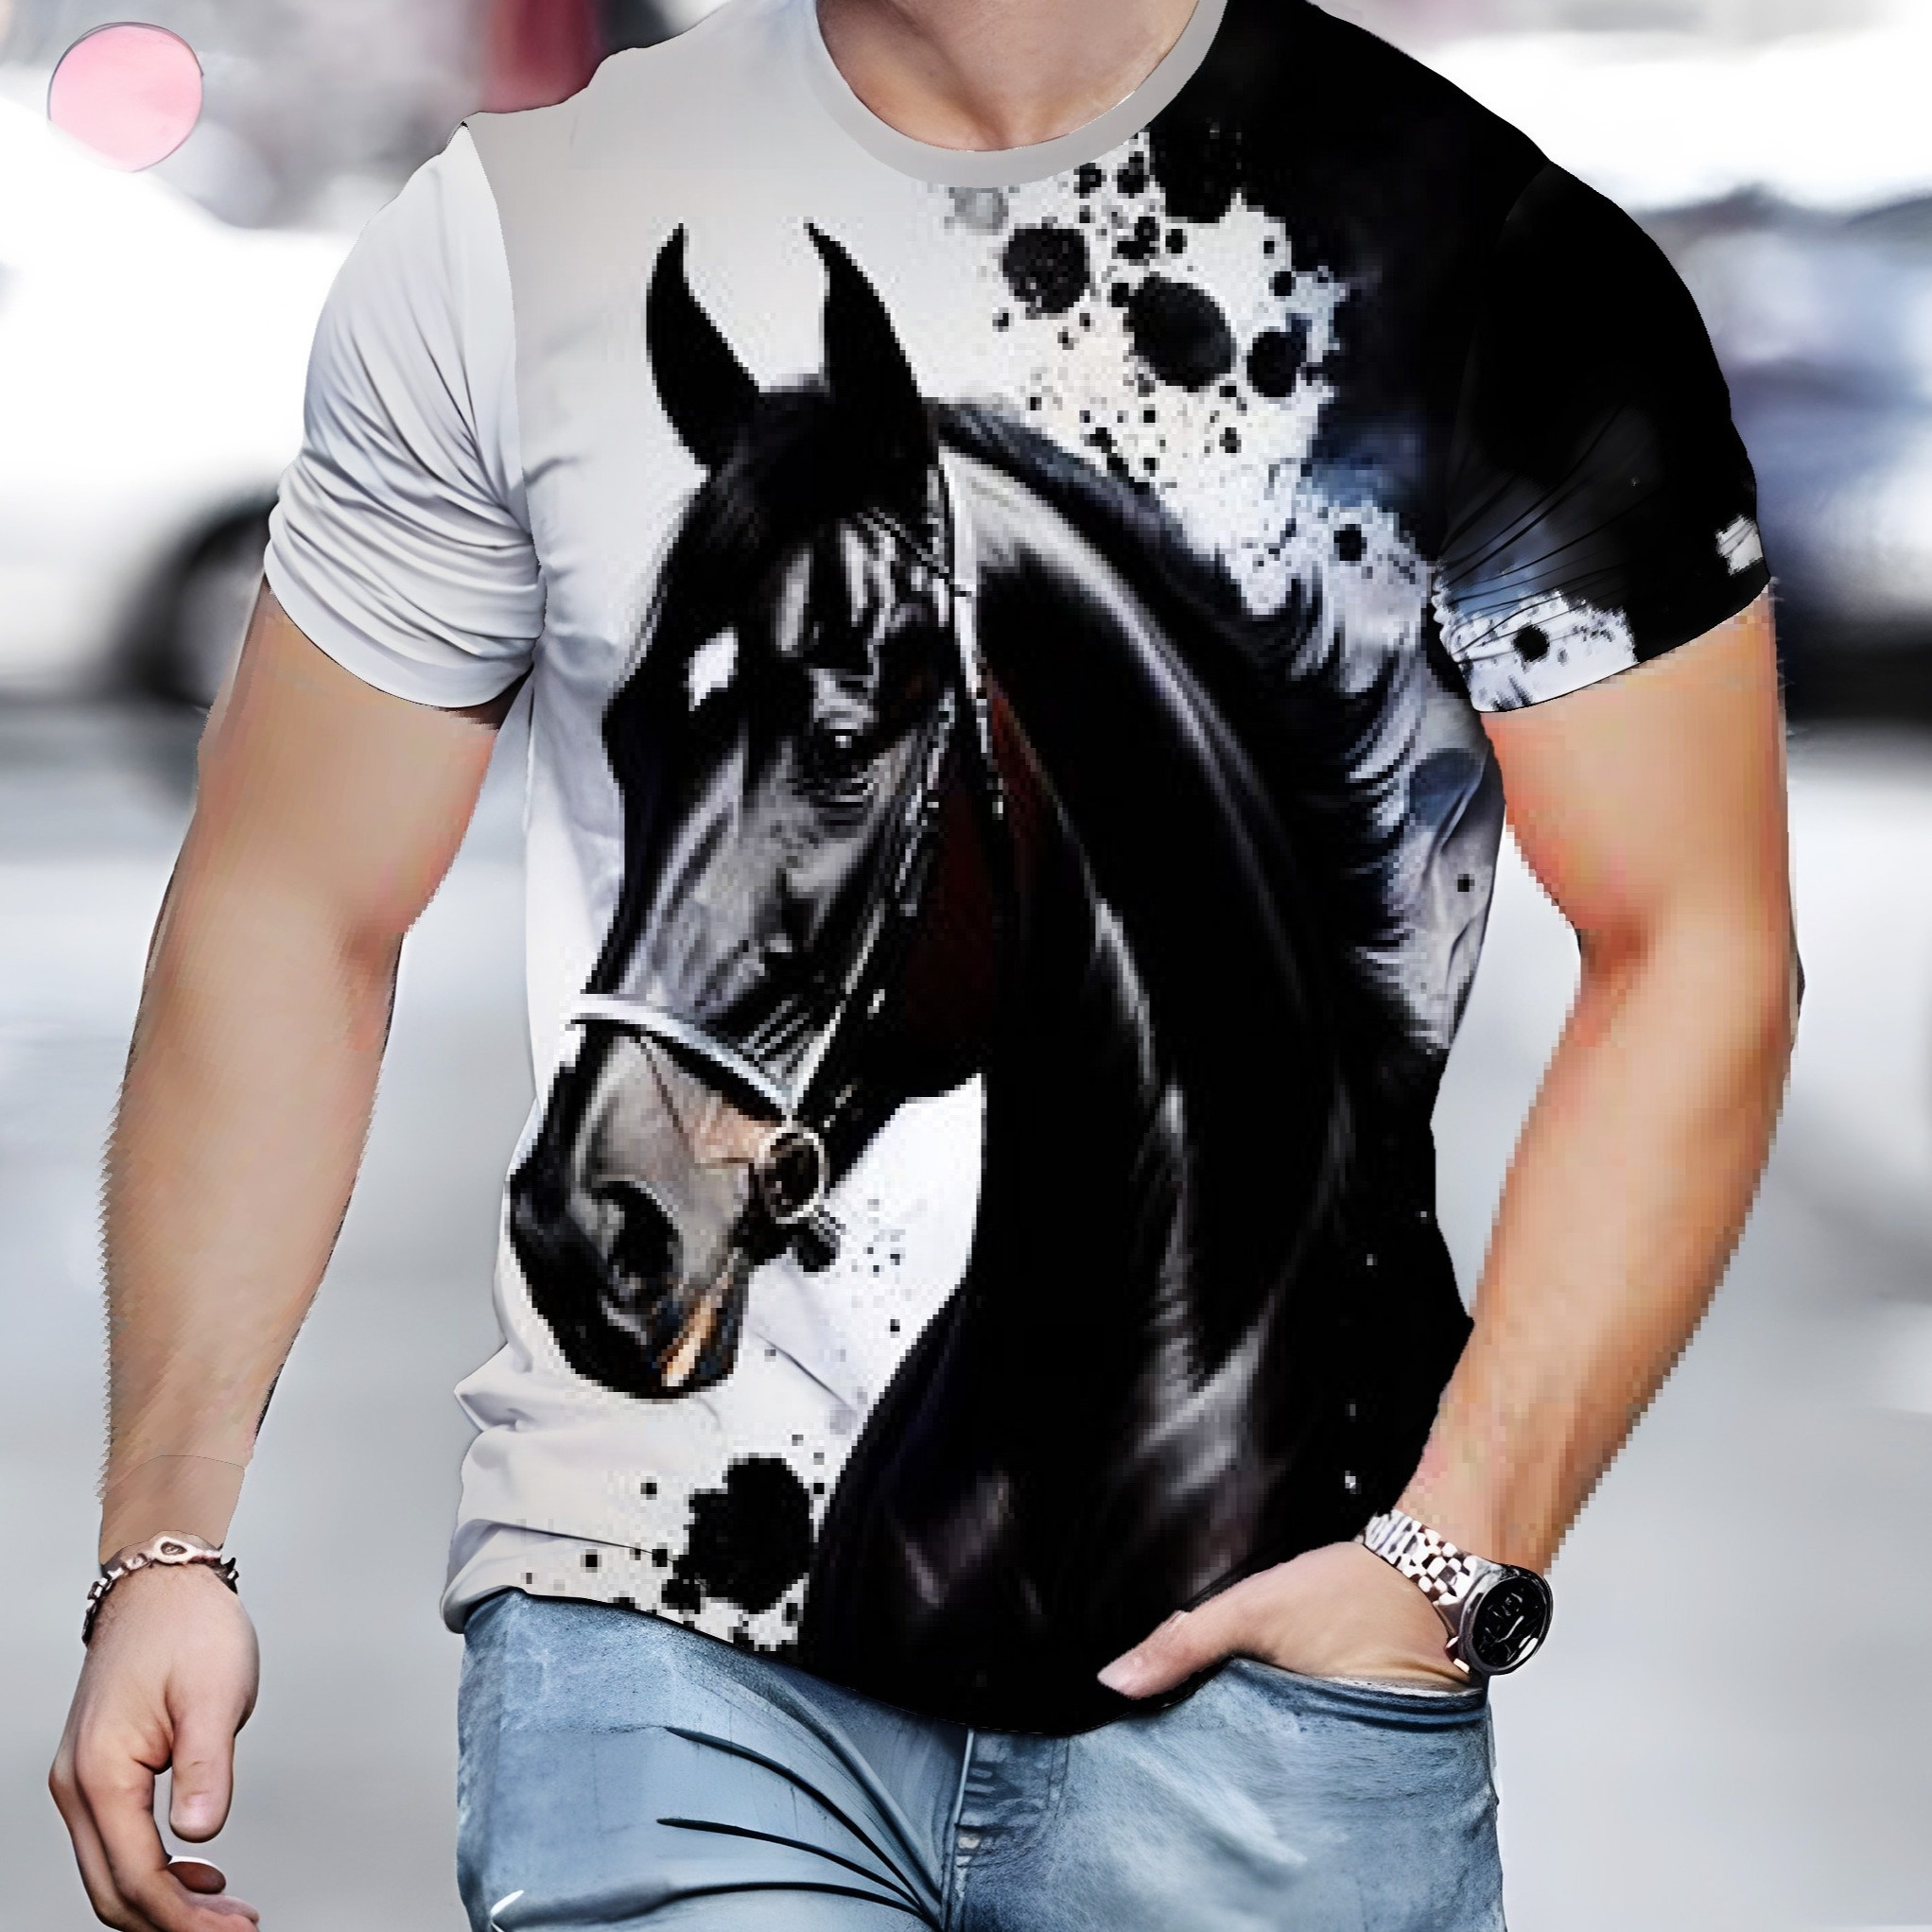 

Men's Casual Crew Neck Graphic T-shirt With Stylish Horse Print, Trendy Printed Short Sleeve Top For Summer Daily Wear